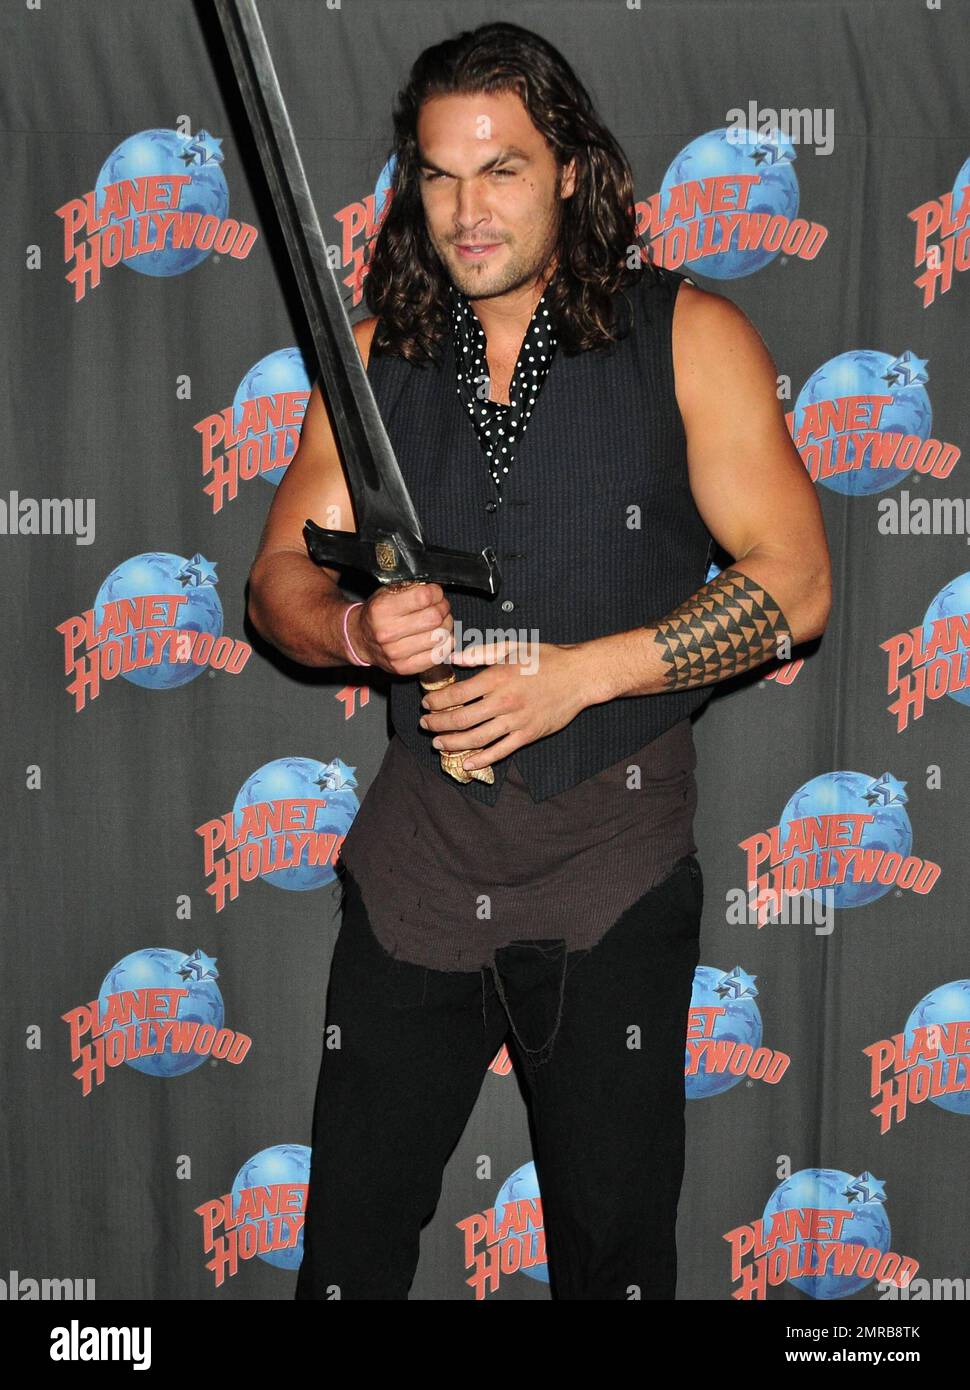 Jason Momoa promotes his starring role in 'Conan the Barbarian' with a hand print ceremony at Planet Hollywood in Times Square.  New York, NY. 18th August 2011. . Stock Photo